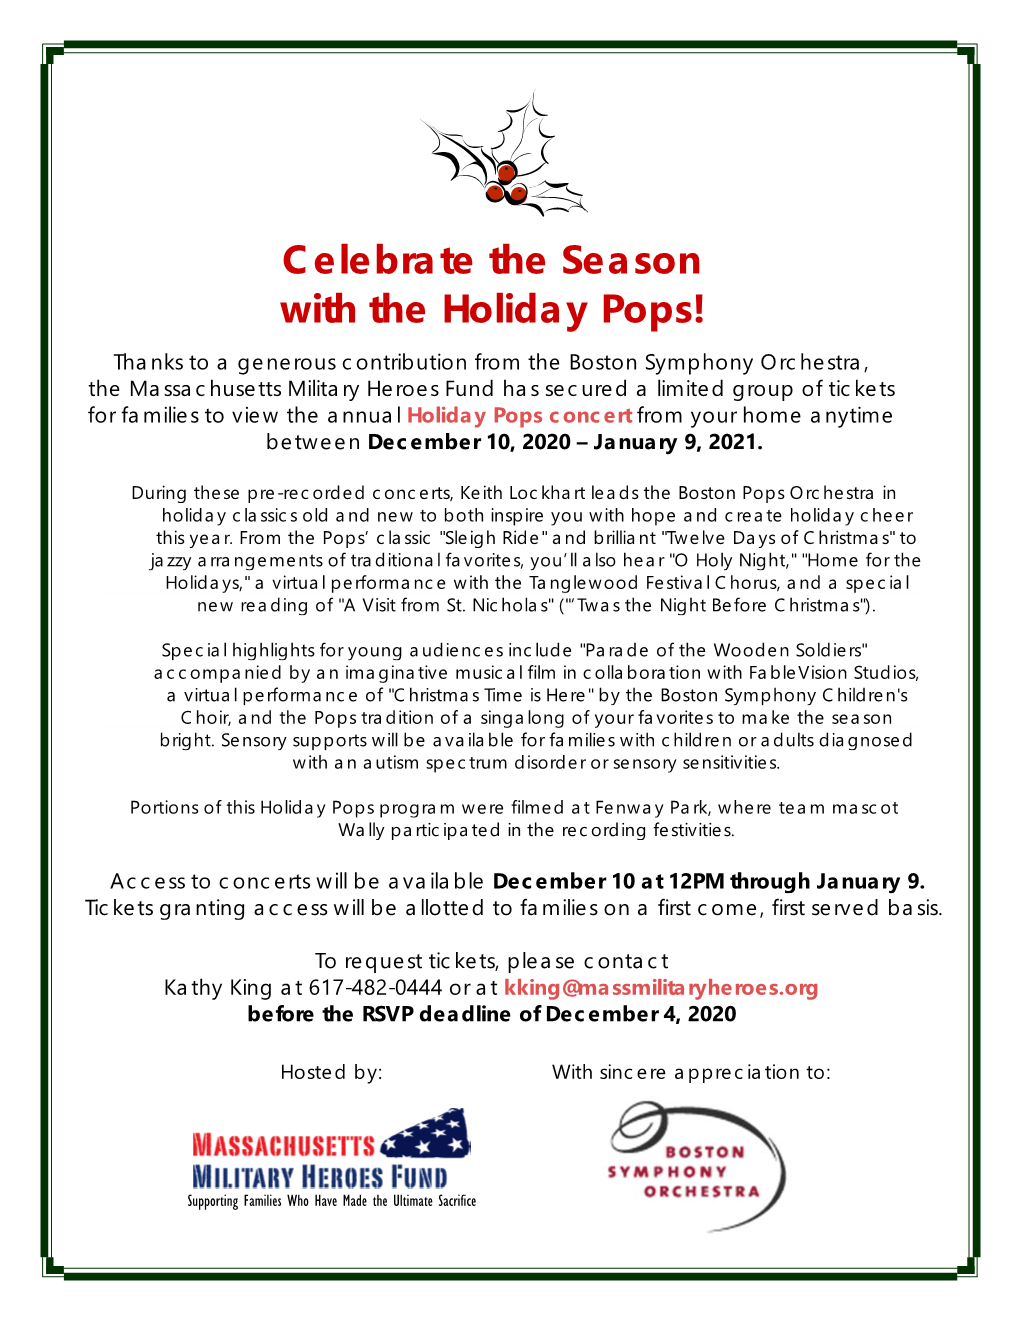 Celebrate the Season with the Holiday Pops!